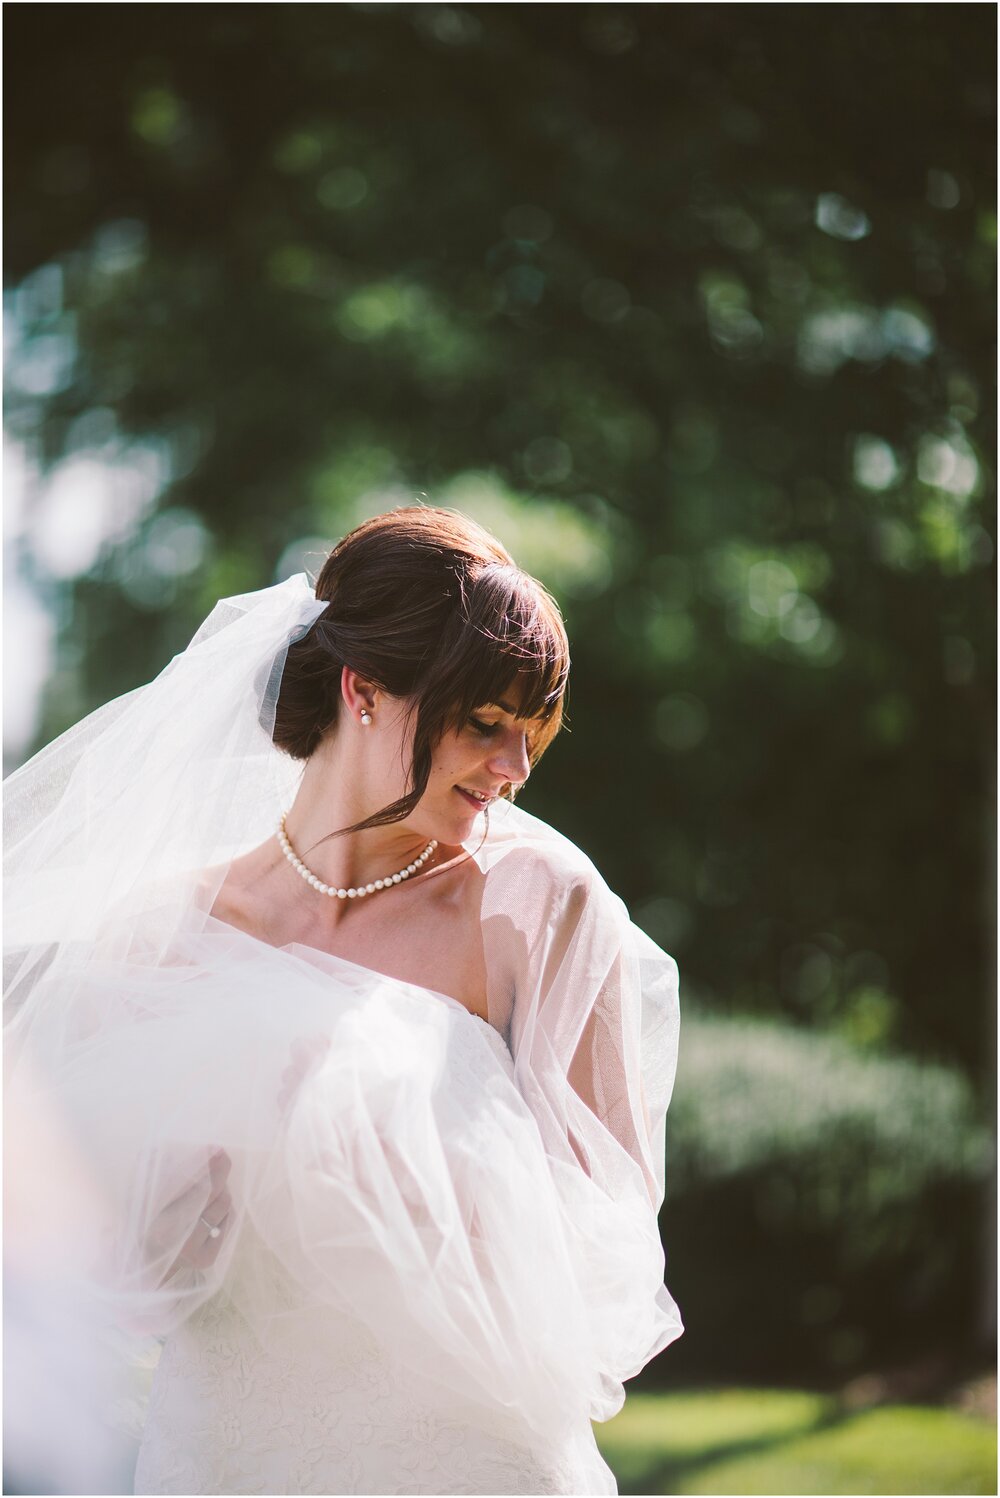 OUR_5TH_ANNIVERSARY_BROOKE_TOBIN_PHOTOGRAPHY_PHOTOS_BY_DANAANNPHOTOGRAPHY_039.jpg